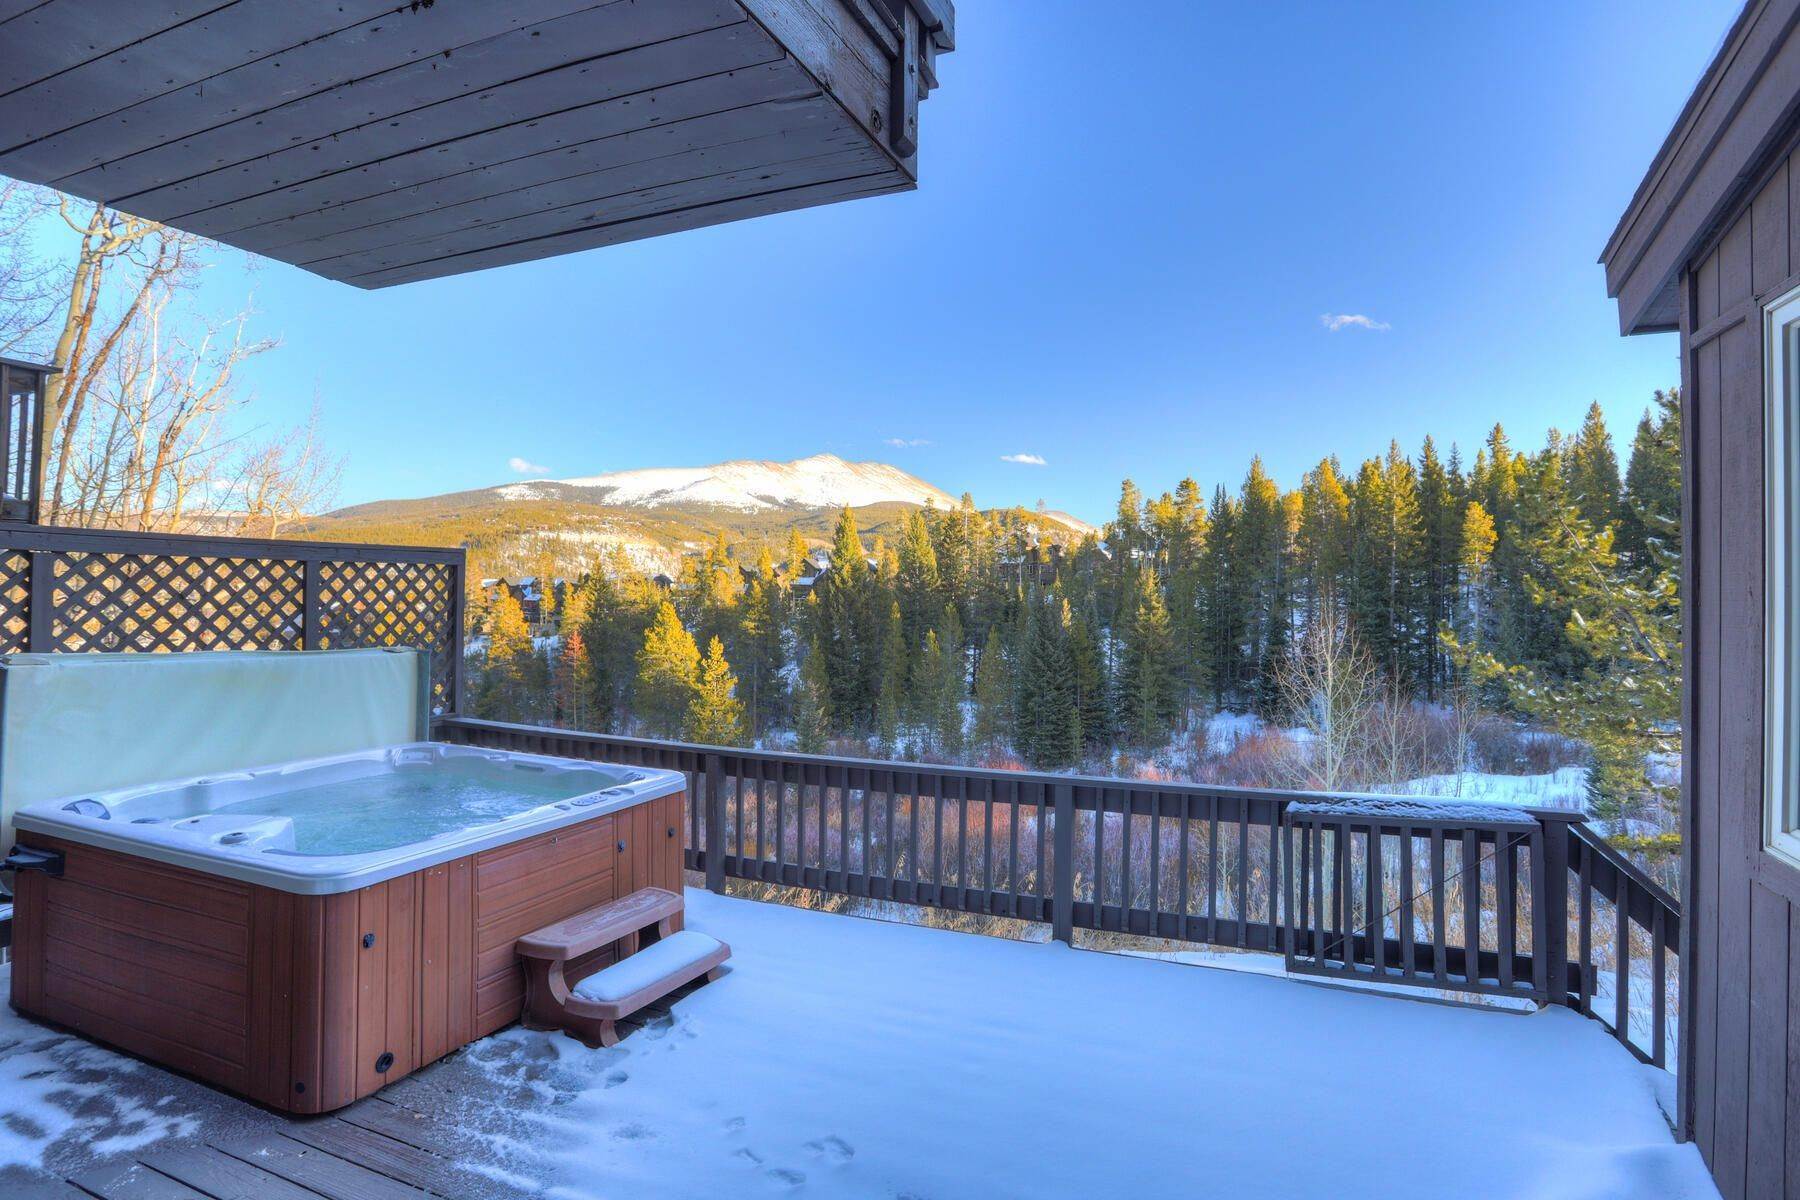 14. Fractional Ownership Property for Active at 965 4 O Clock Road, Breckenridge, CO 80424 965 4 O Clock Road Breckenridge, Colorado 80424 United States